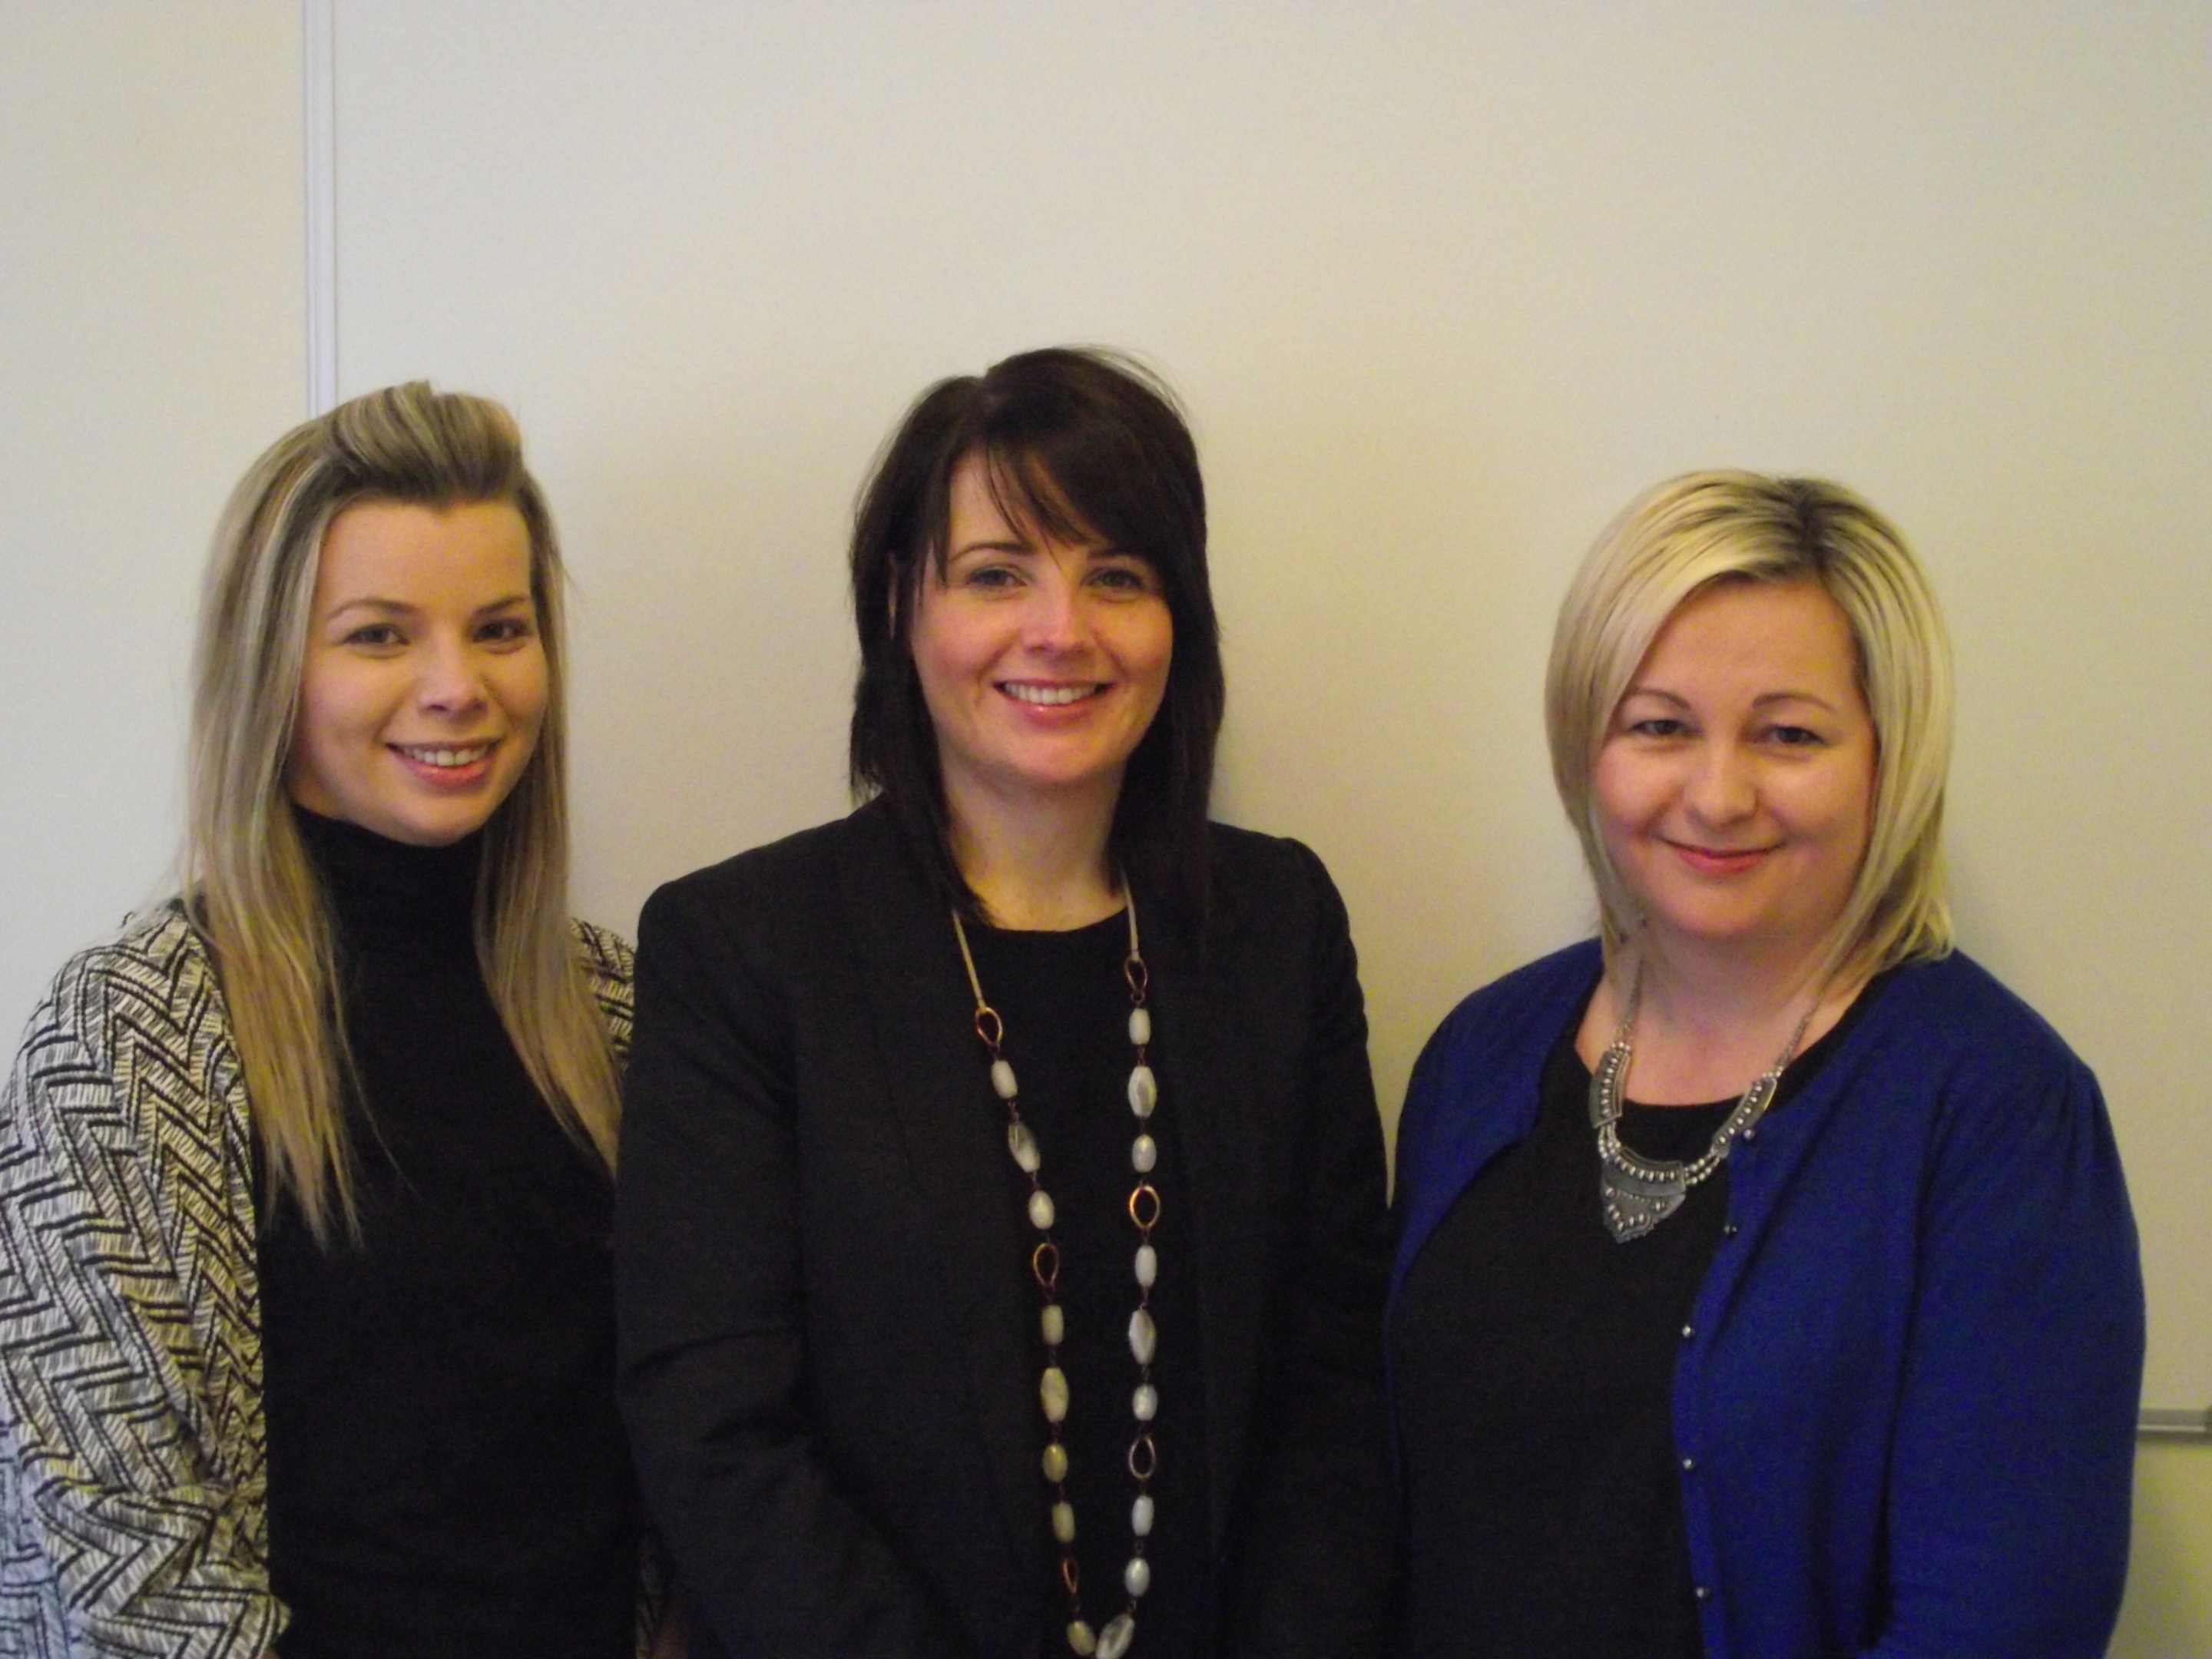 From left to right: Stephanie Hossack Contact Centre Organiser , Arlene Harvey Contact Centre Manager and Jacquie Noble Administrator